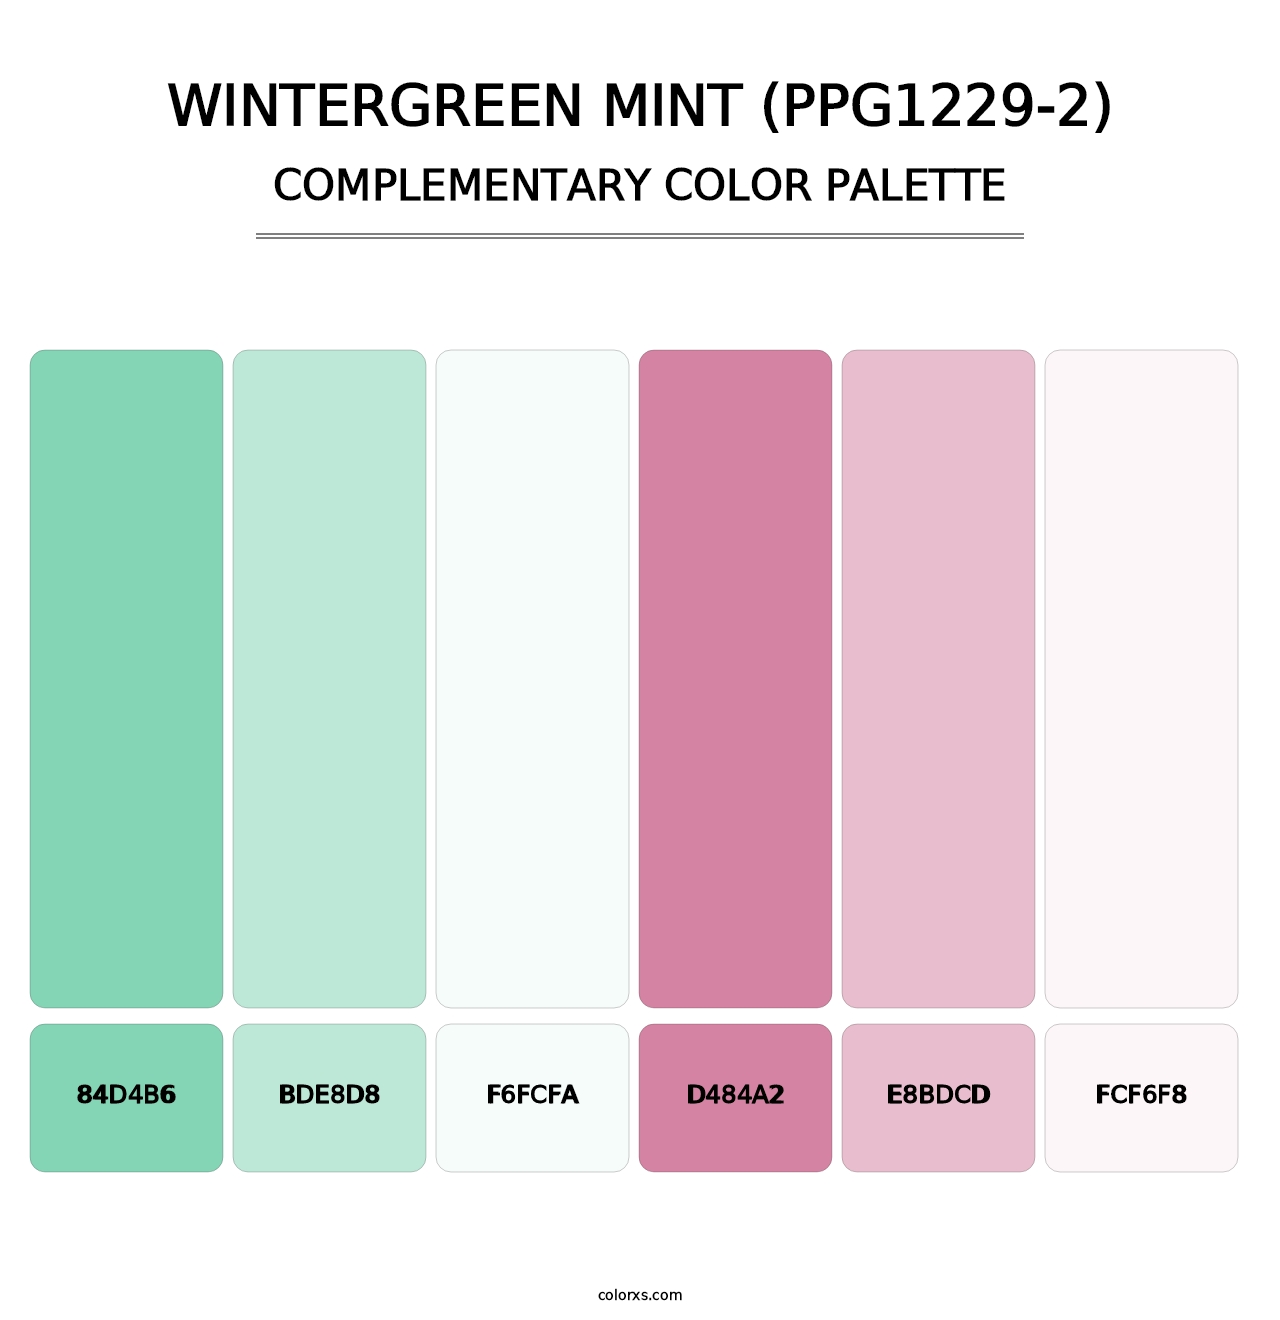 Wintergreen Mint (PPG1229-2) - Complementary Color Palette